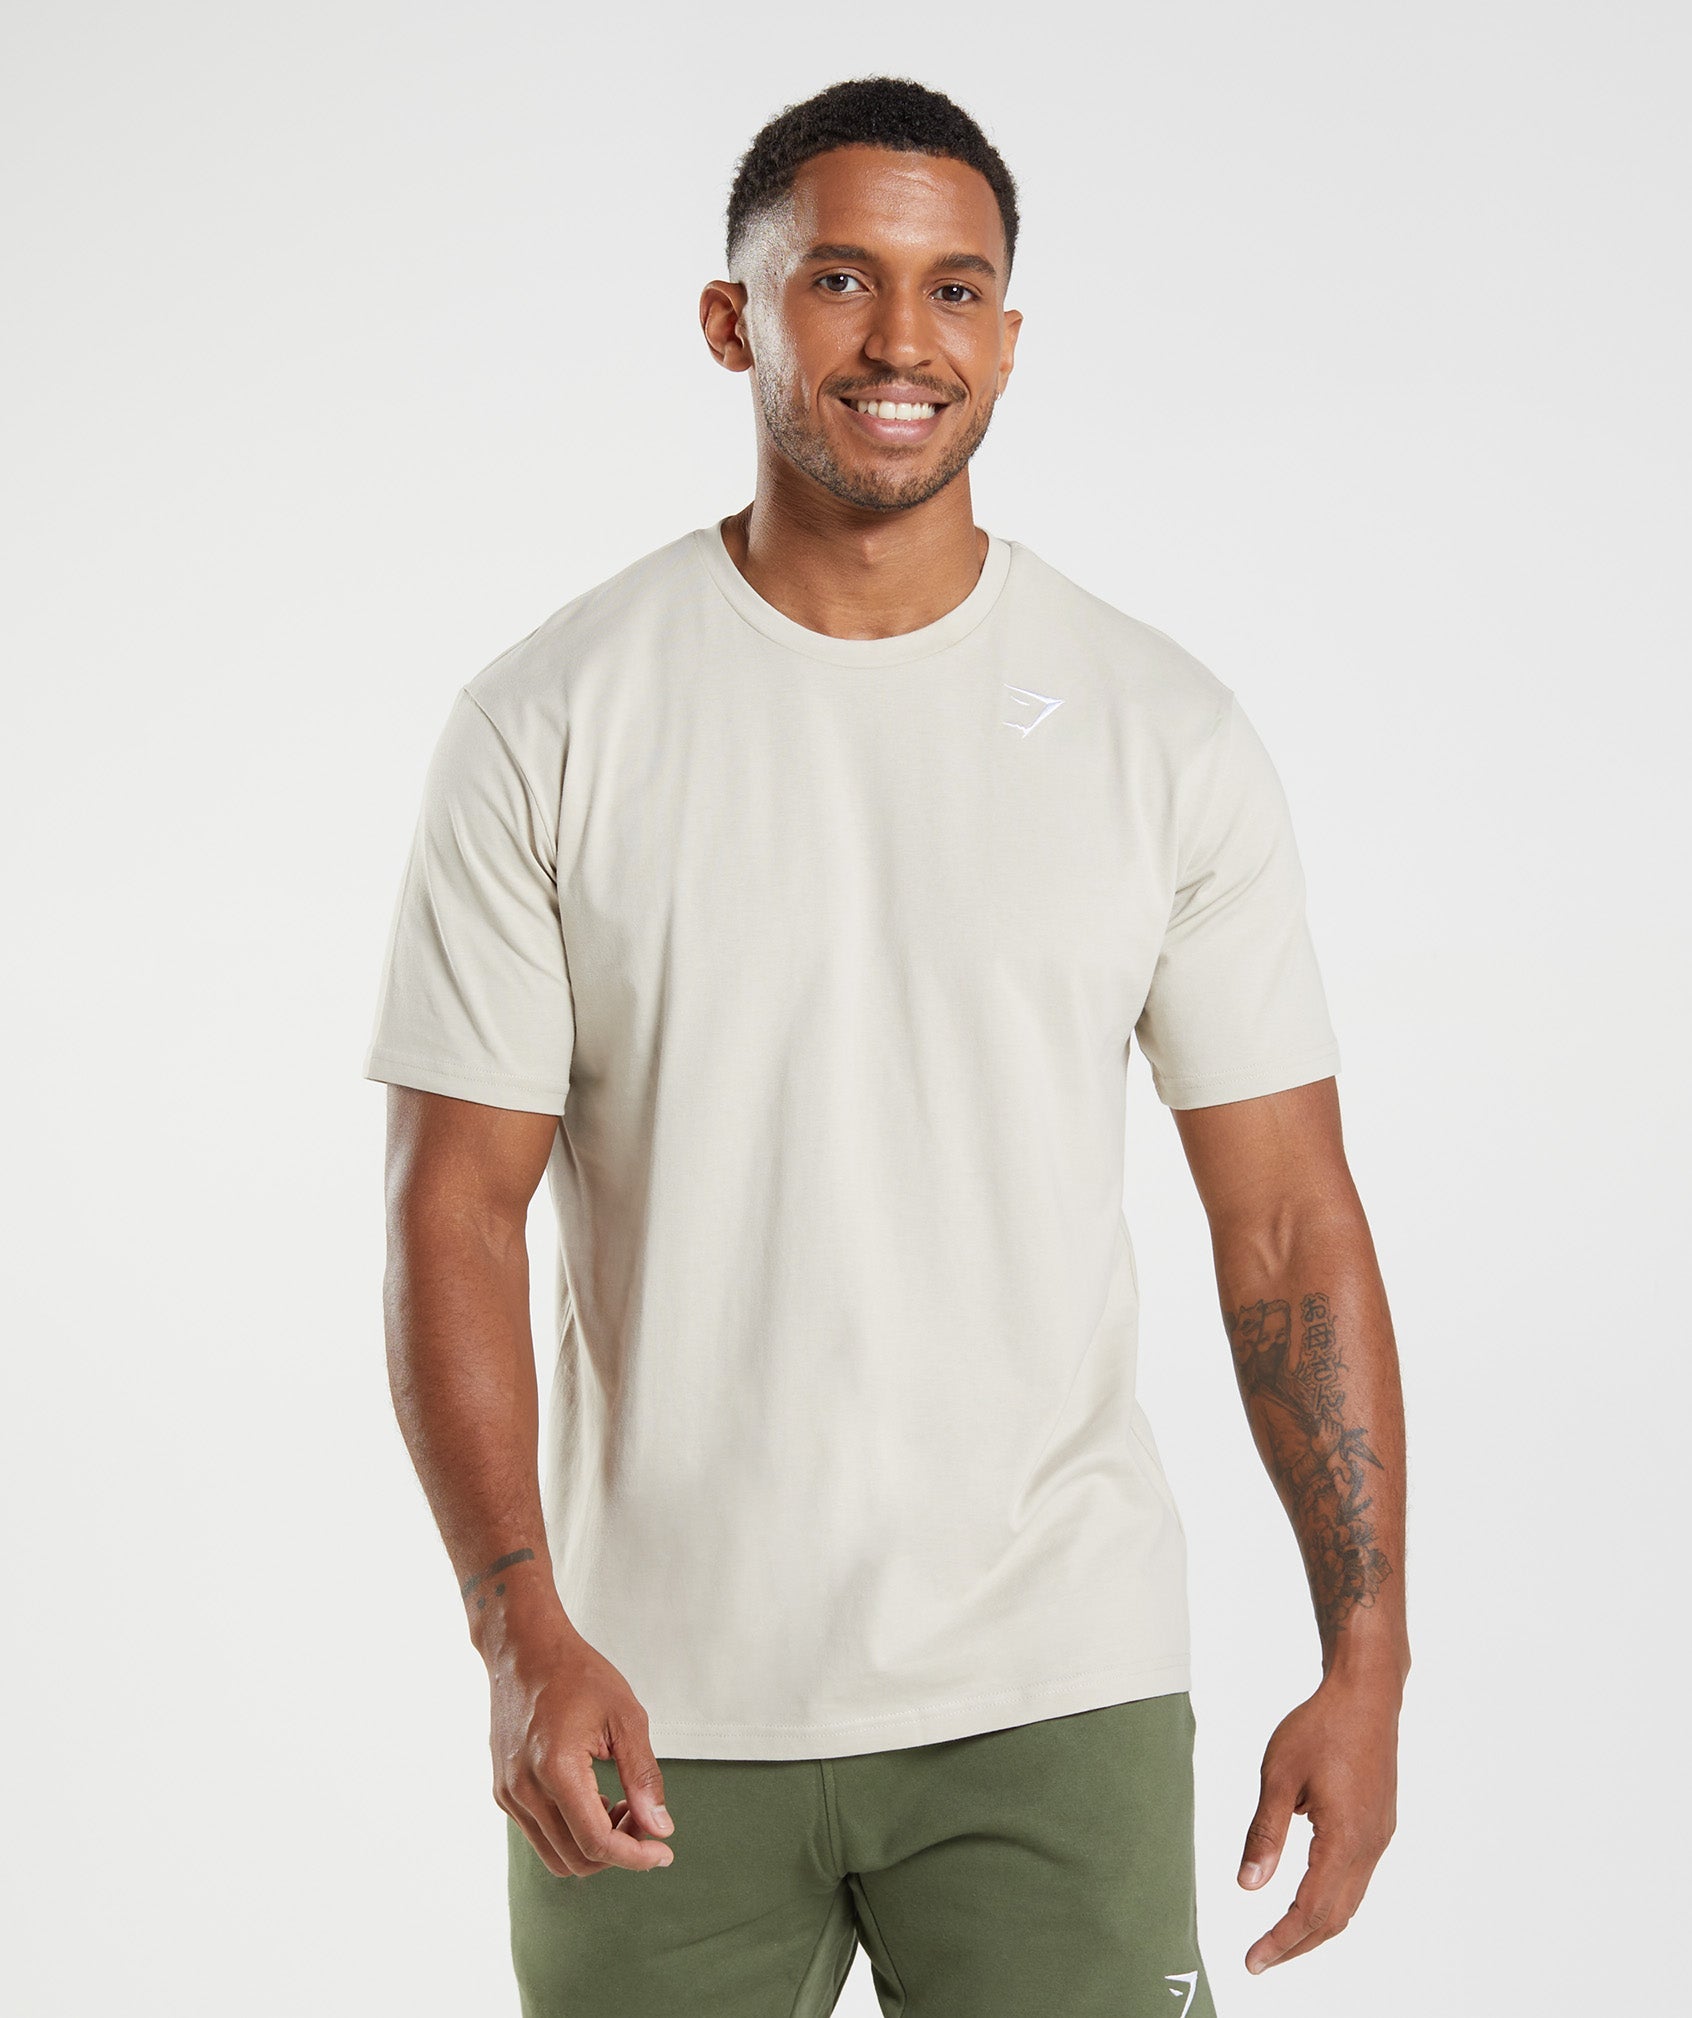 Crest T-Shirt in Pebble Grey